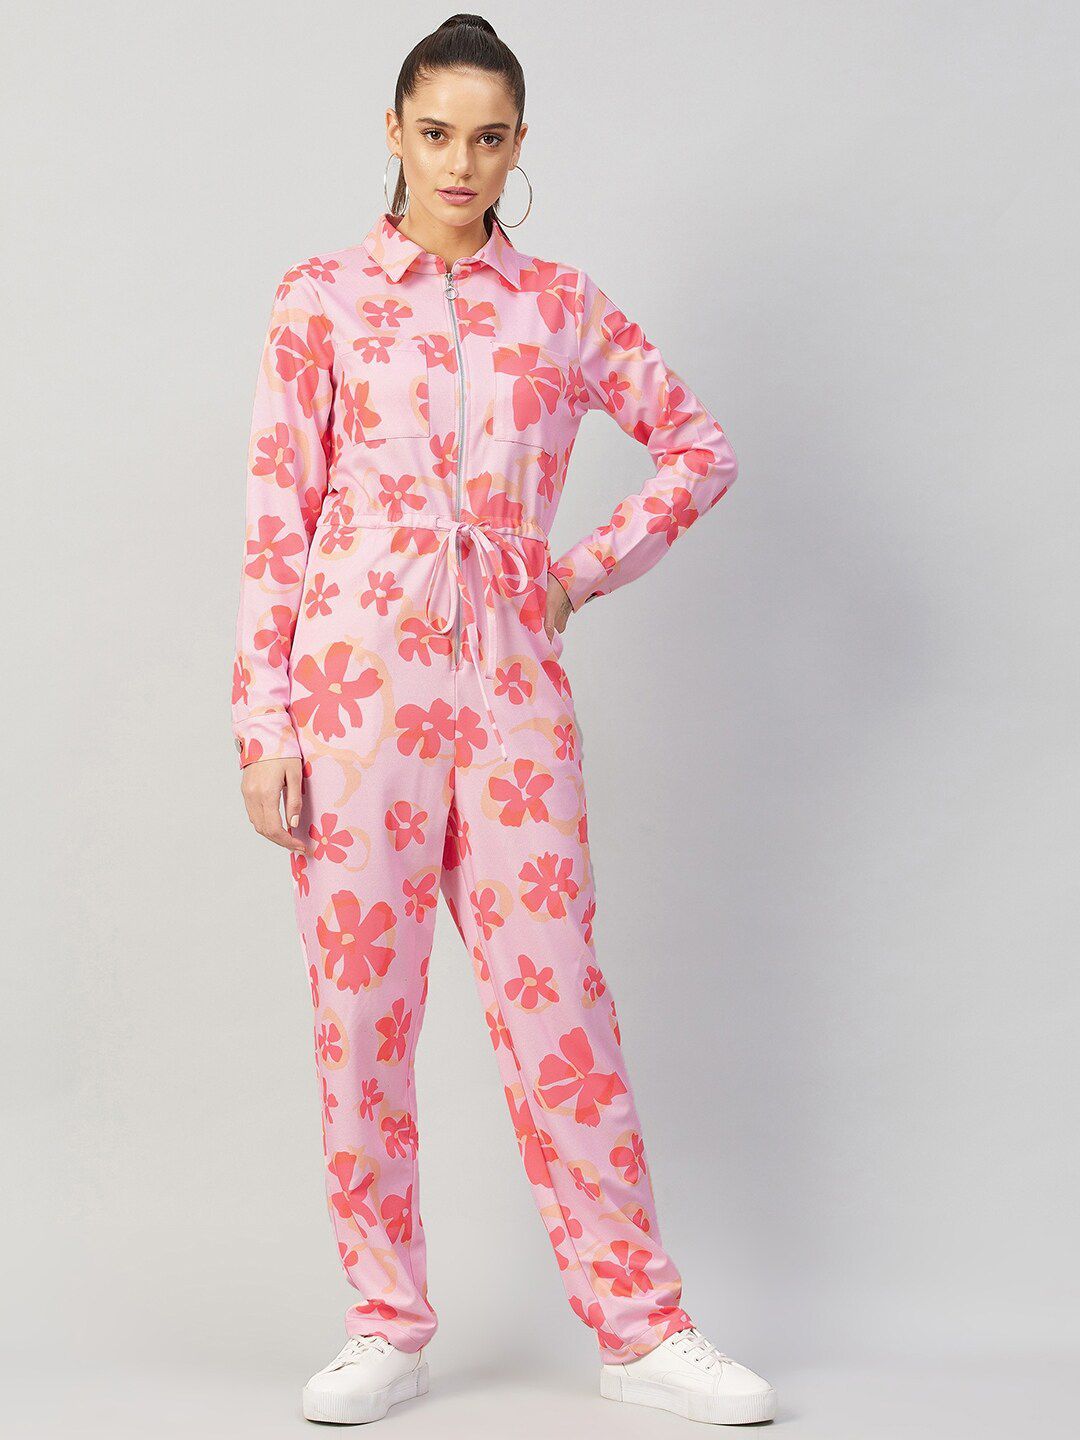 Athena Pink & White Floral Printed Jumpsuit Price in India